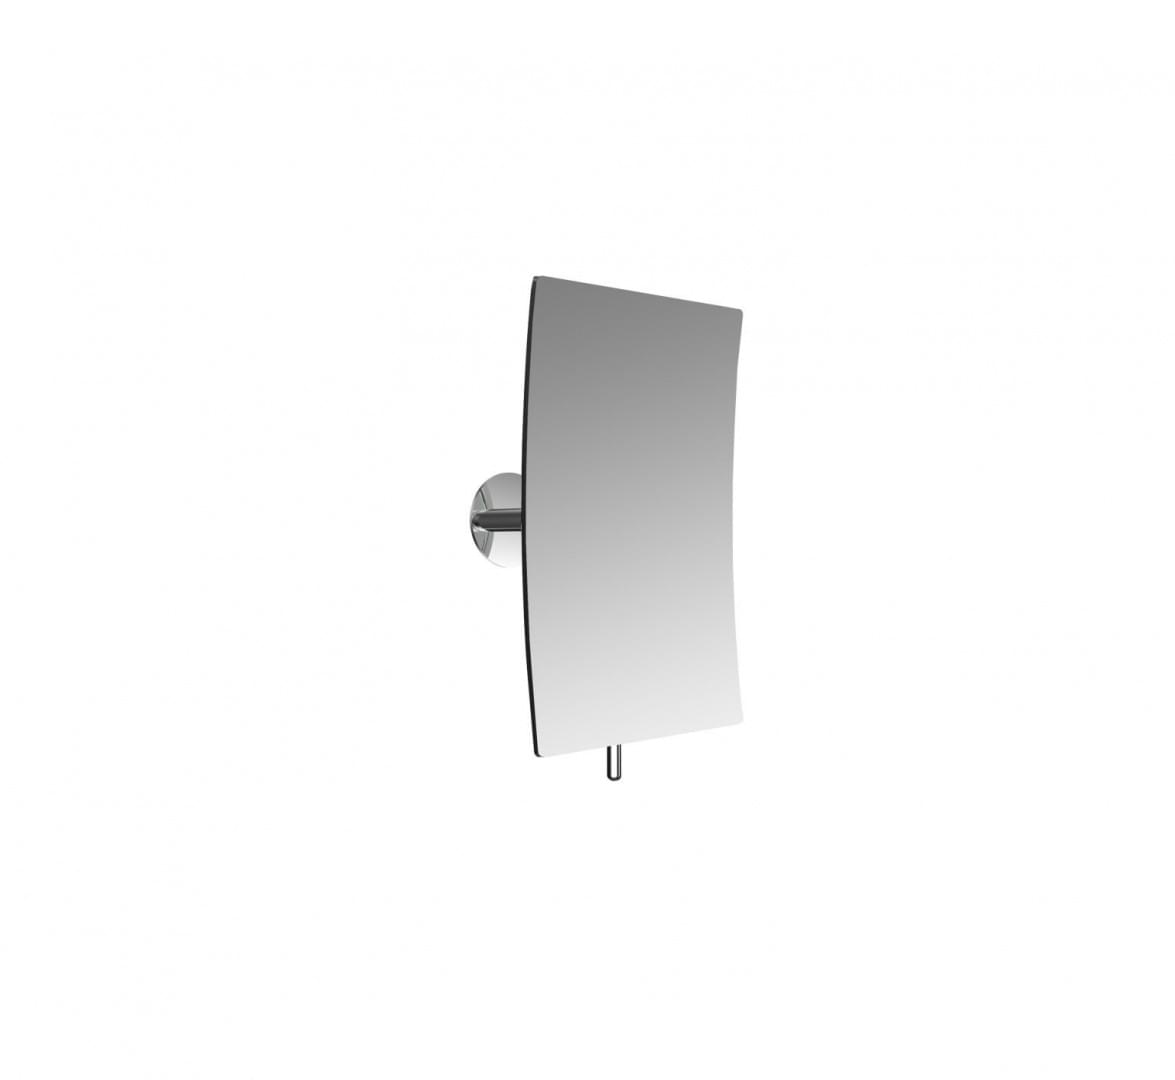 Stick-on mirror, 132 x 212 mm from Emco